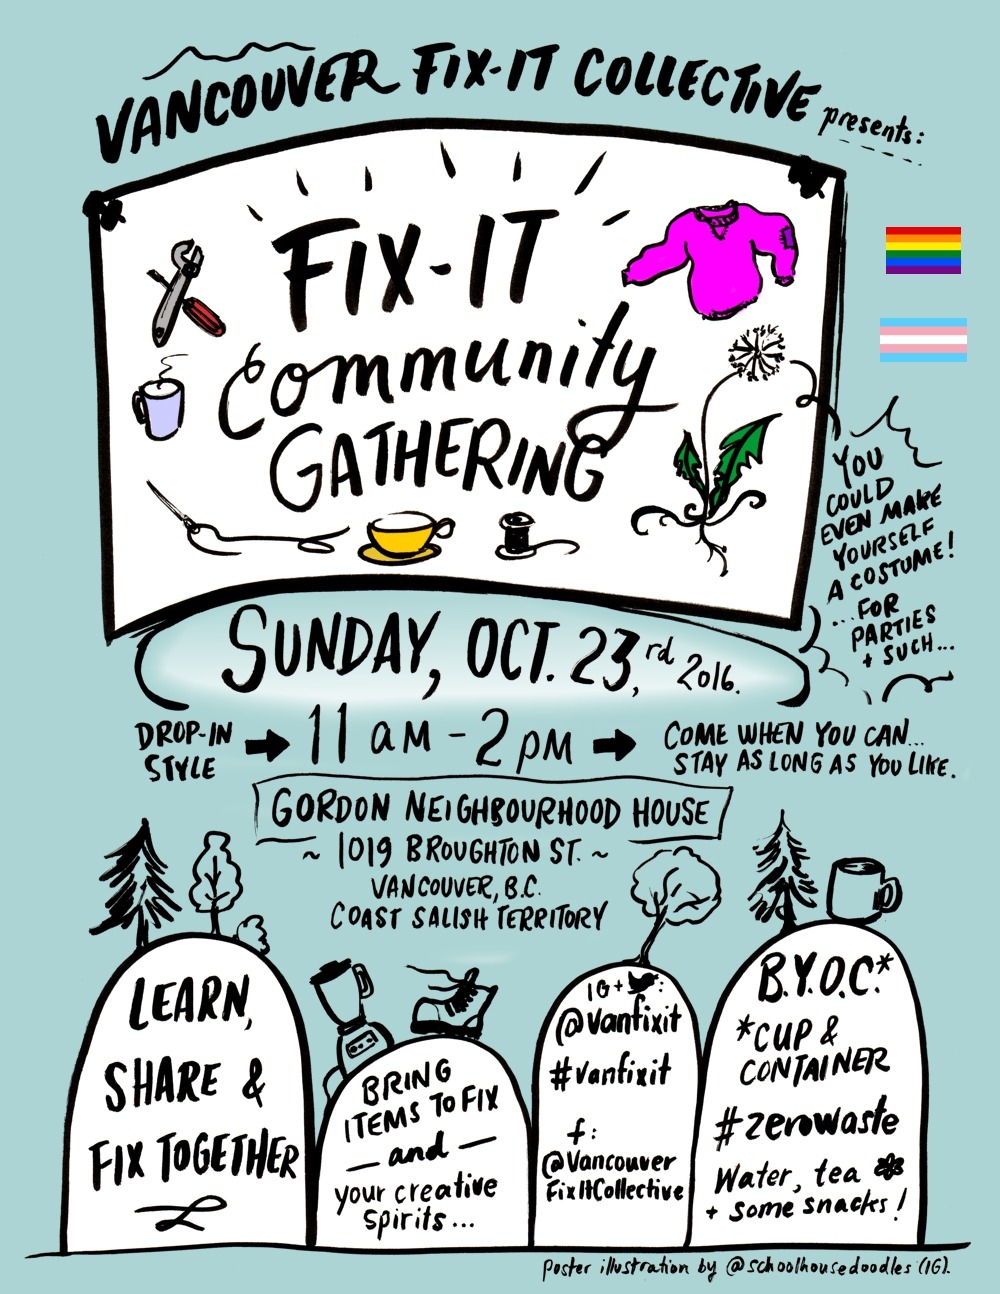 [image: poster for upcoming Fix-It Community Gathering event Oct 23, 2016 from 11-2pm, “drop-in style, come when you can stay as long as you like” at Gordon Neighbourhood House 1019 Broughton Street, Vancouver BC, Coast Salish Territory. Light blue...